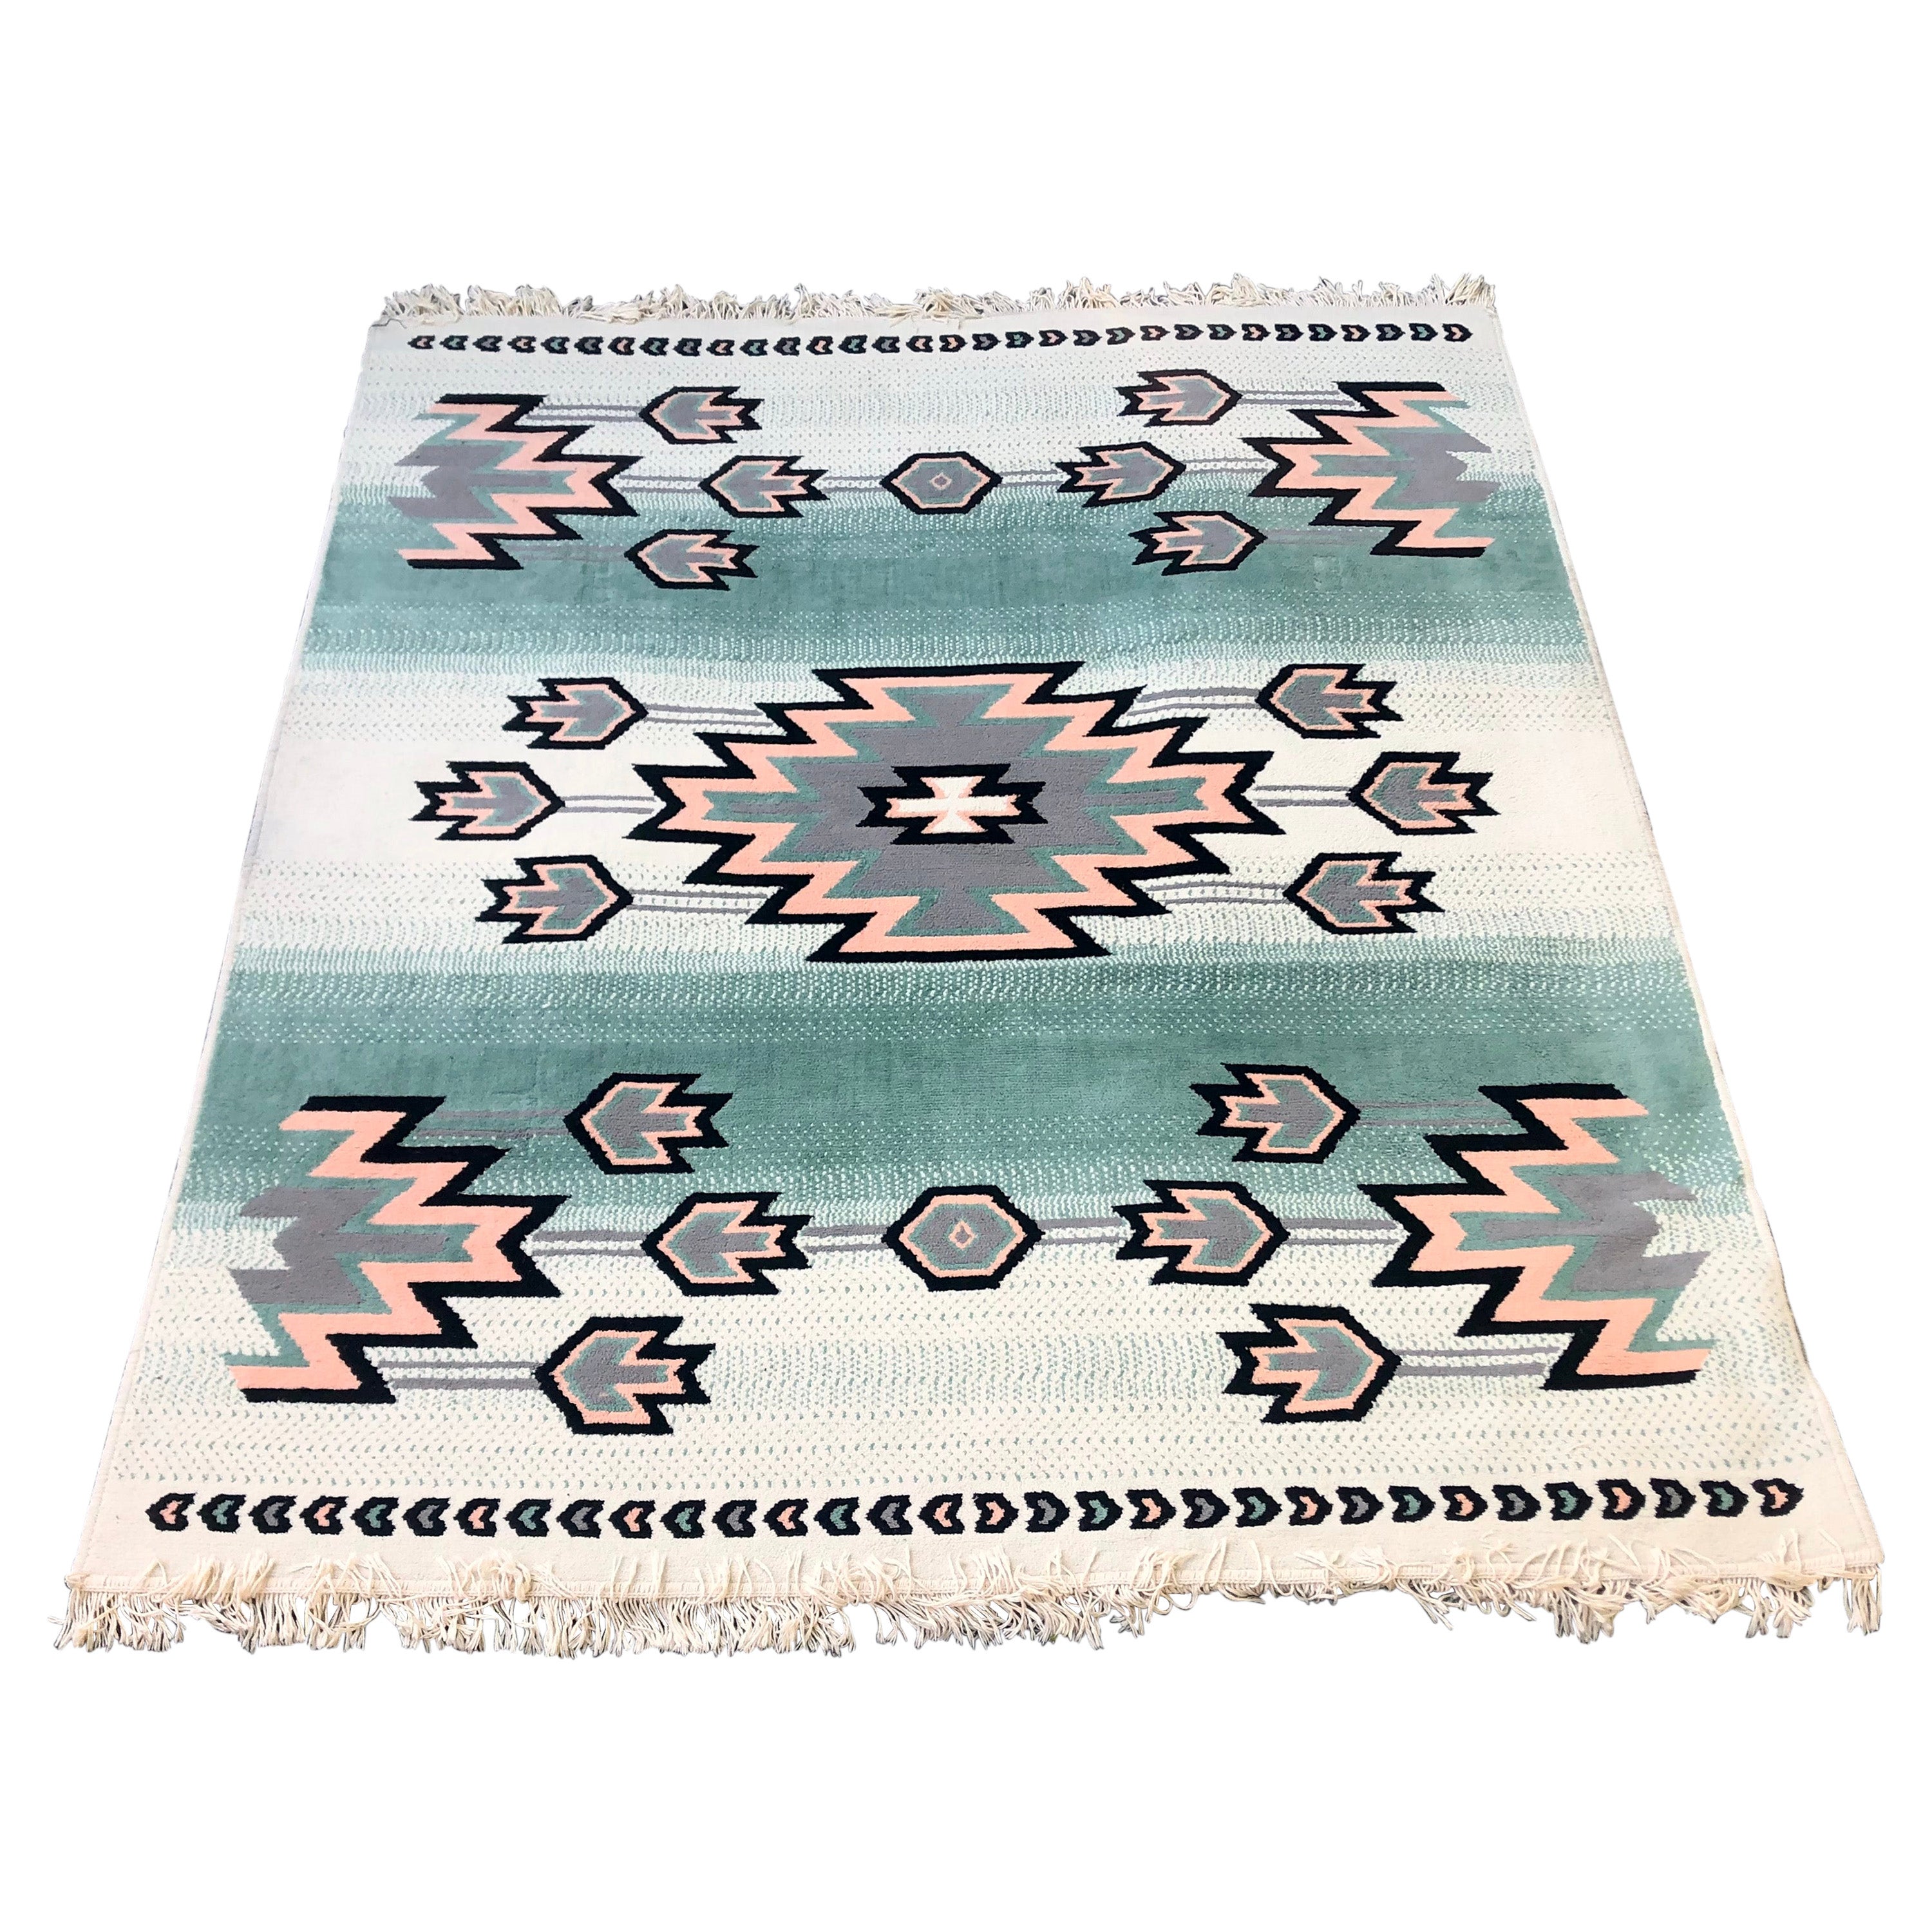 Late 20th Century Southwest Inspired Area Rug